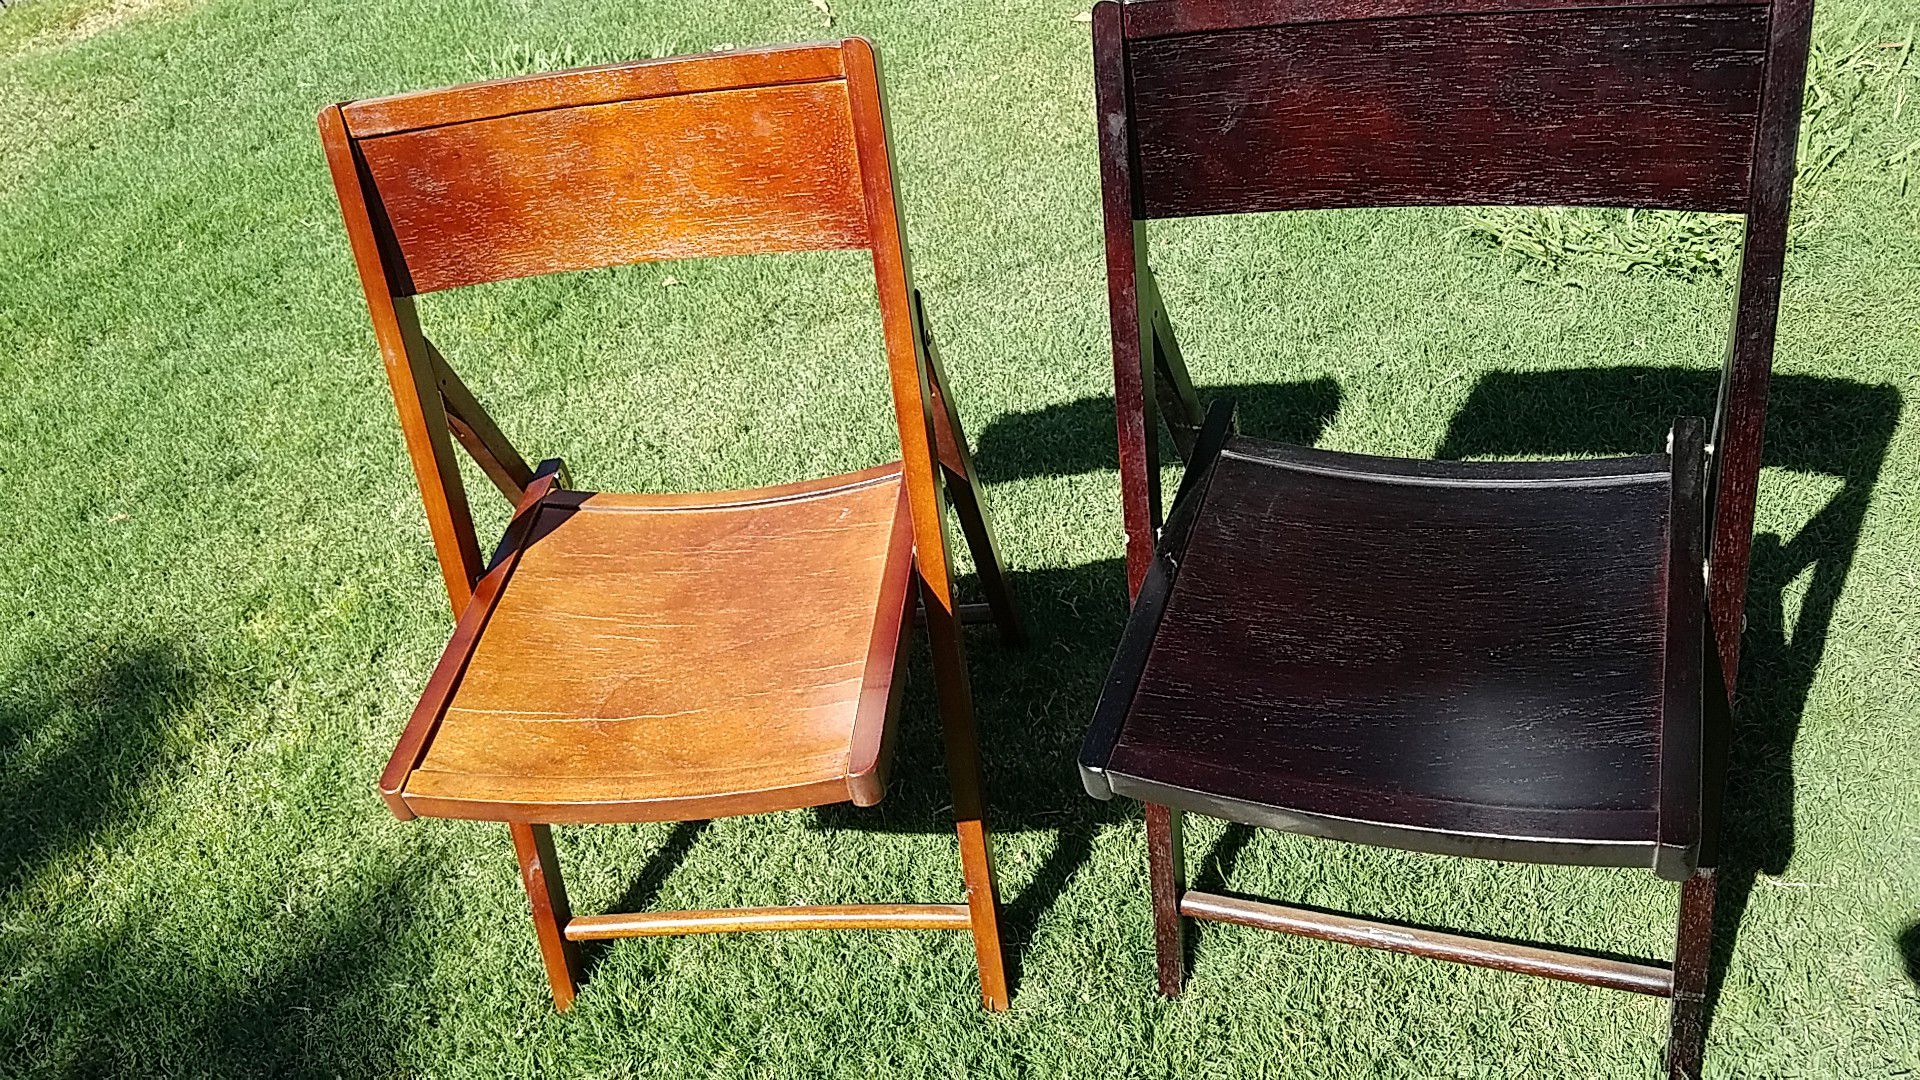 4 black wooden chairs and 4 dark redwood chairs